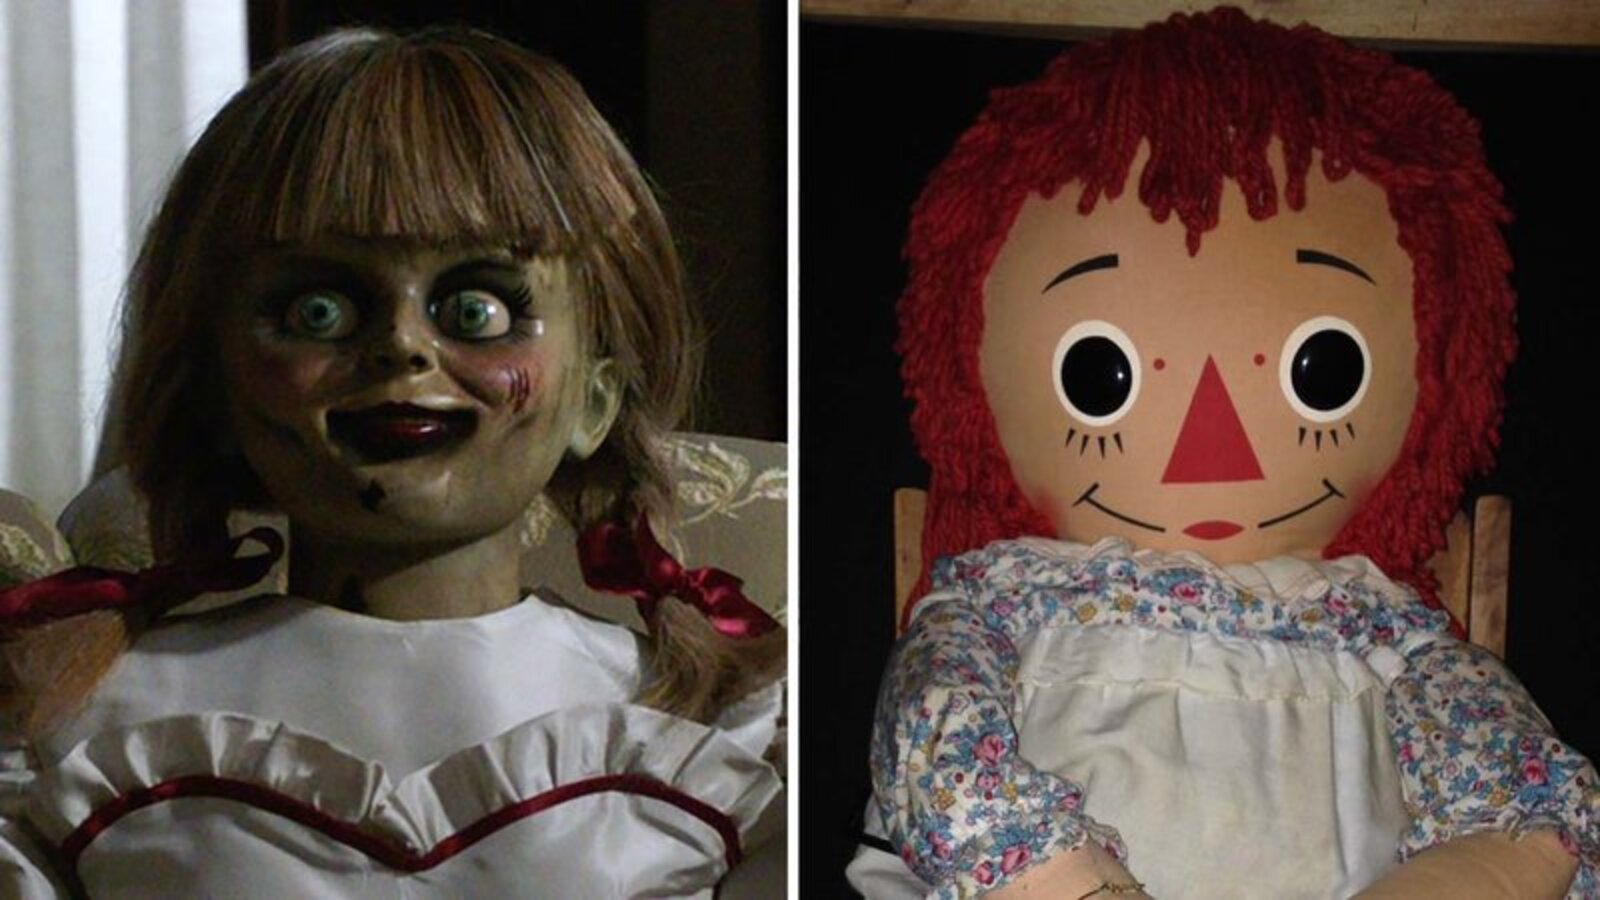 The real Annabelle doll didn't escape: Where is she locked up? – Film Daily